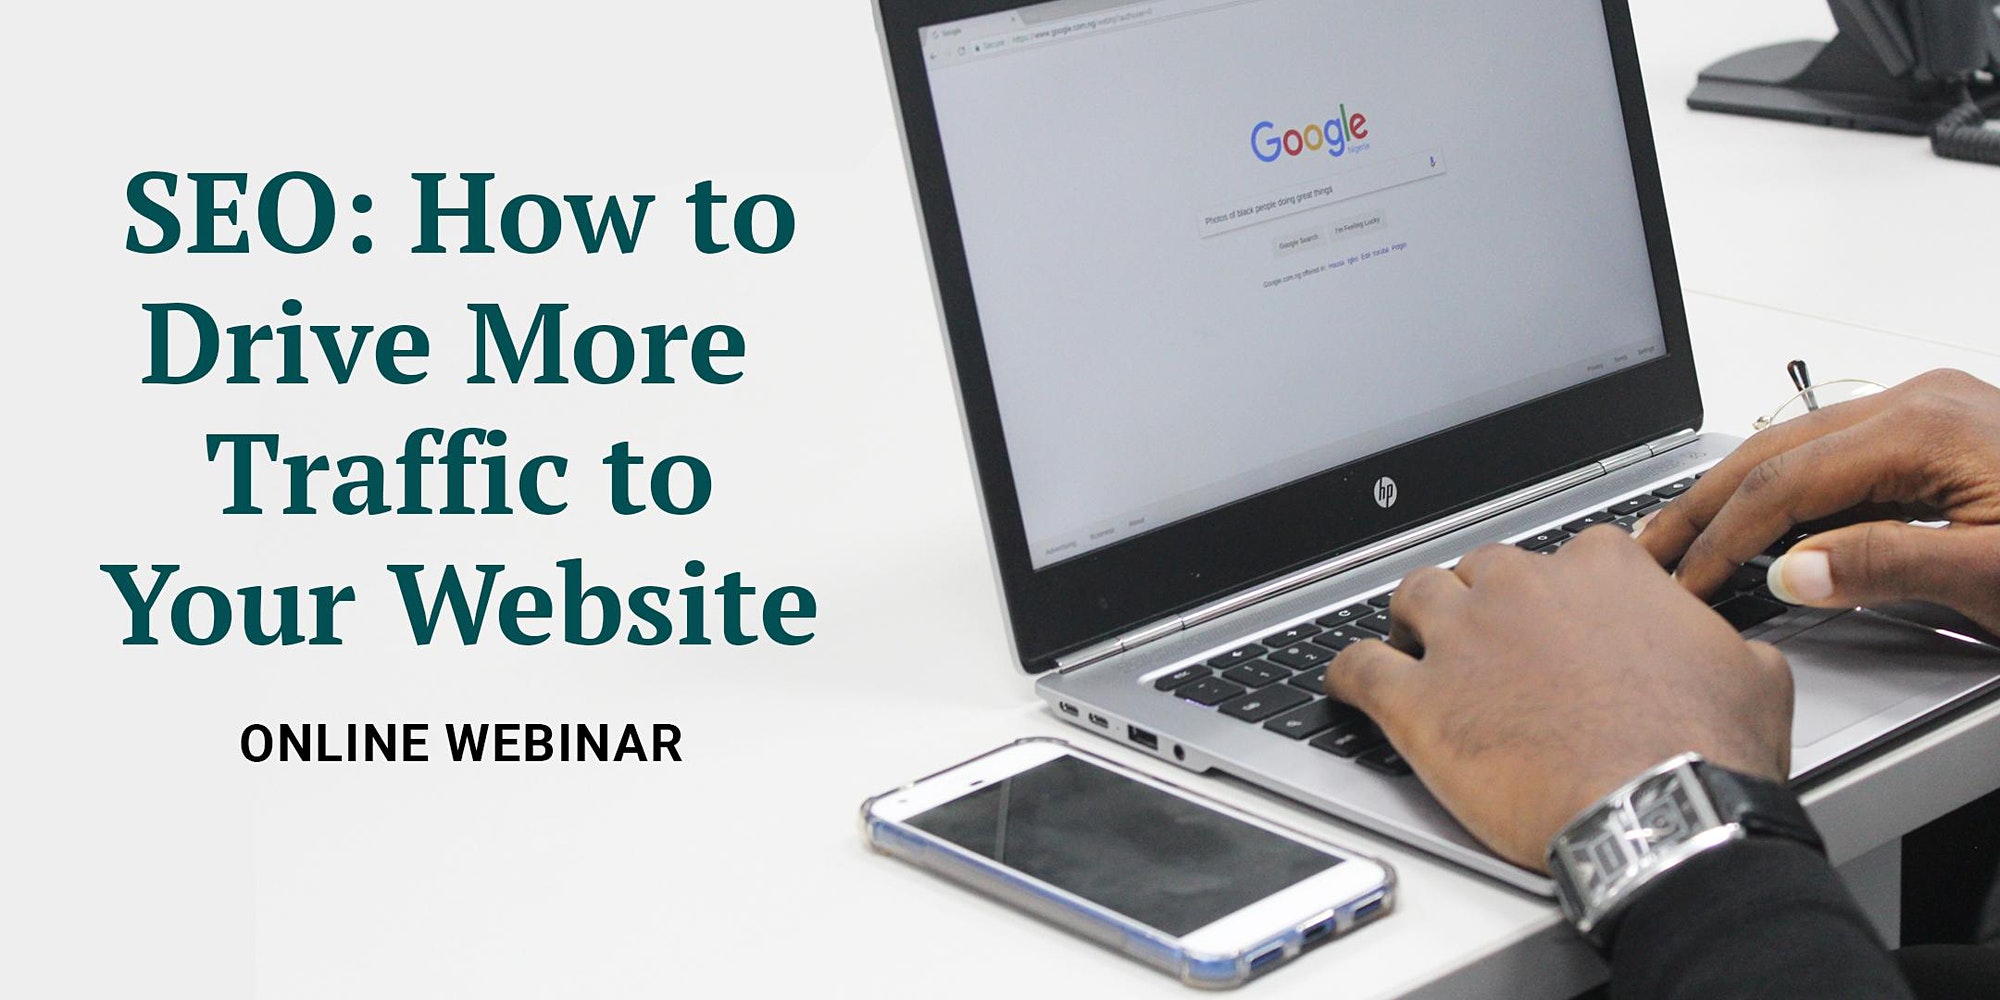 SEO: How to drive more traffic to your website. Online webinar